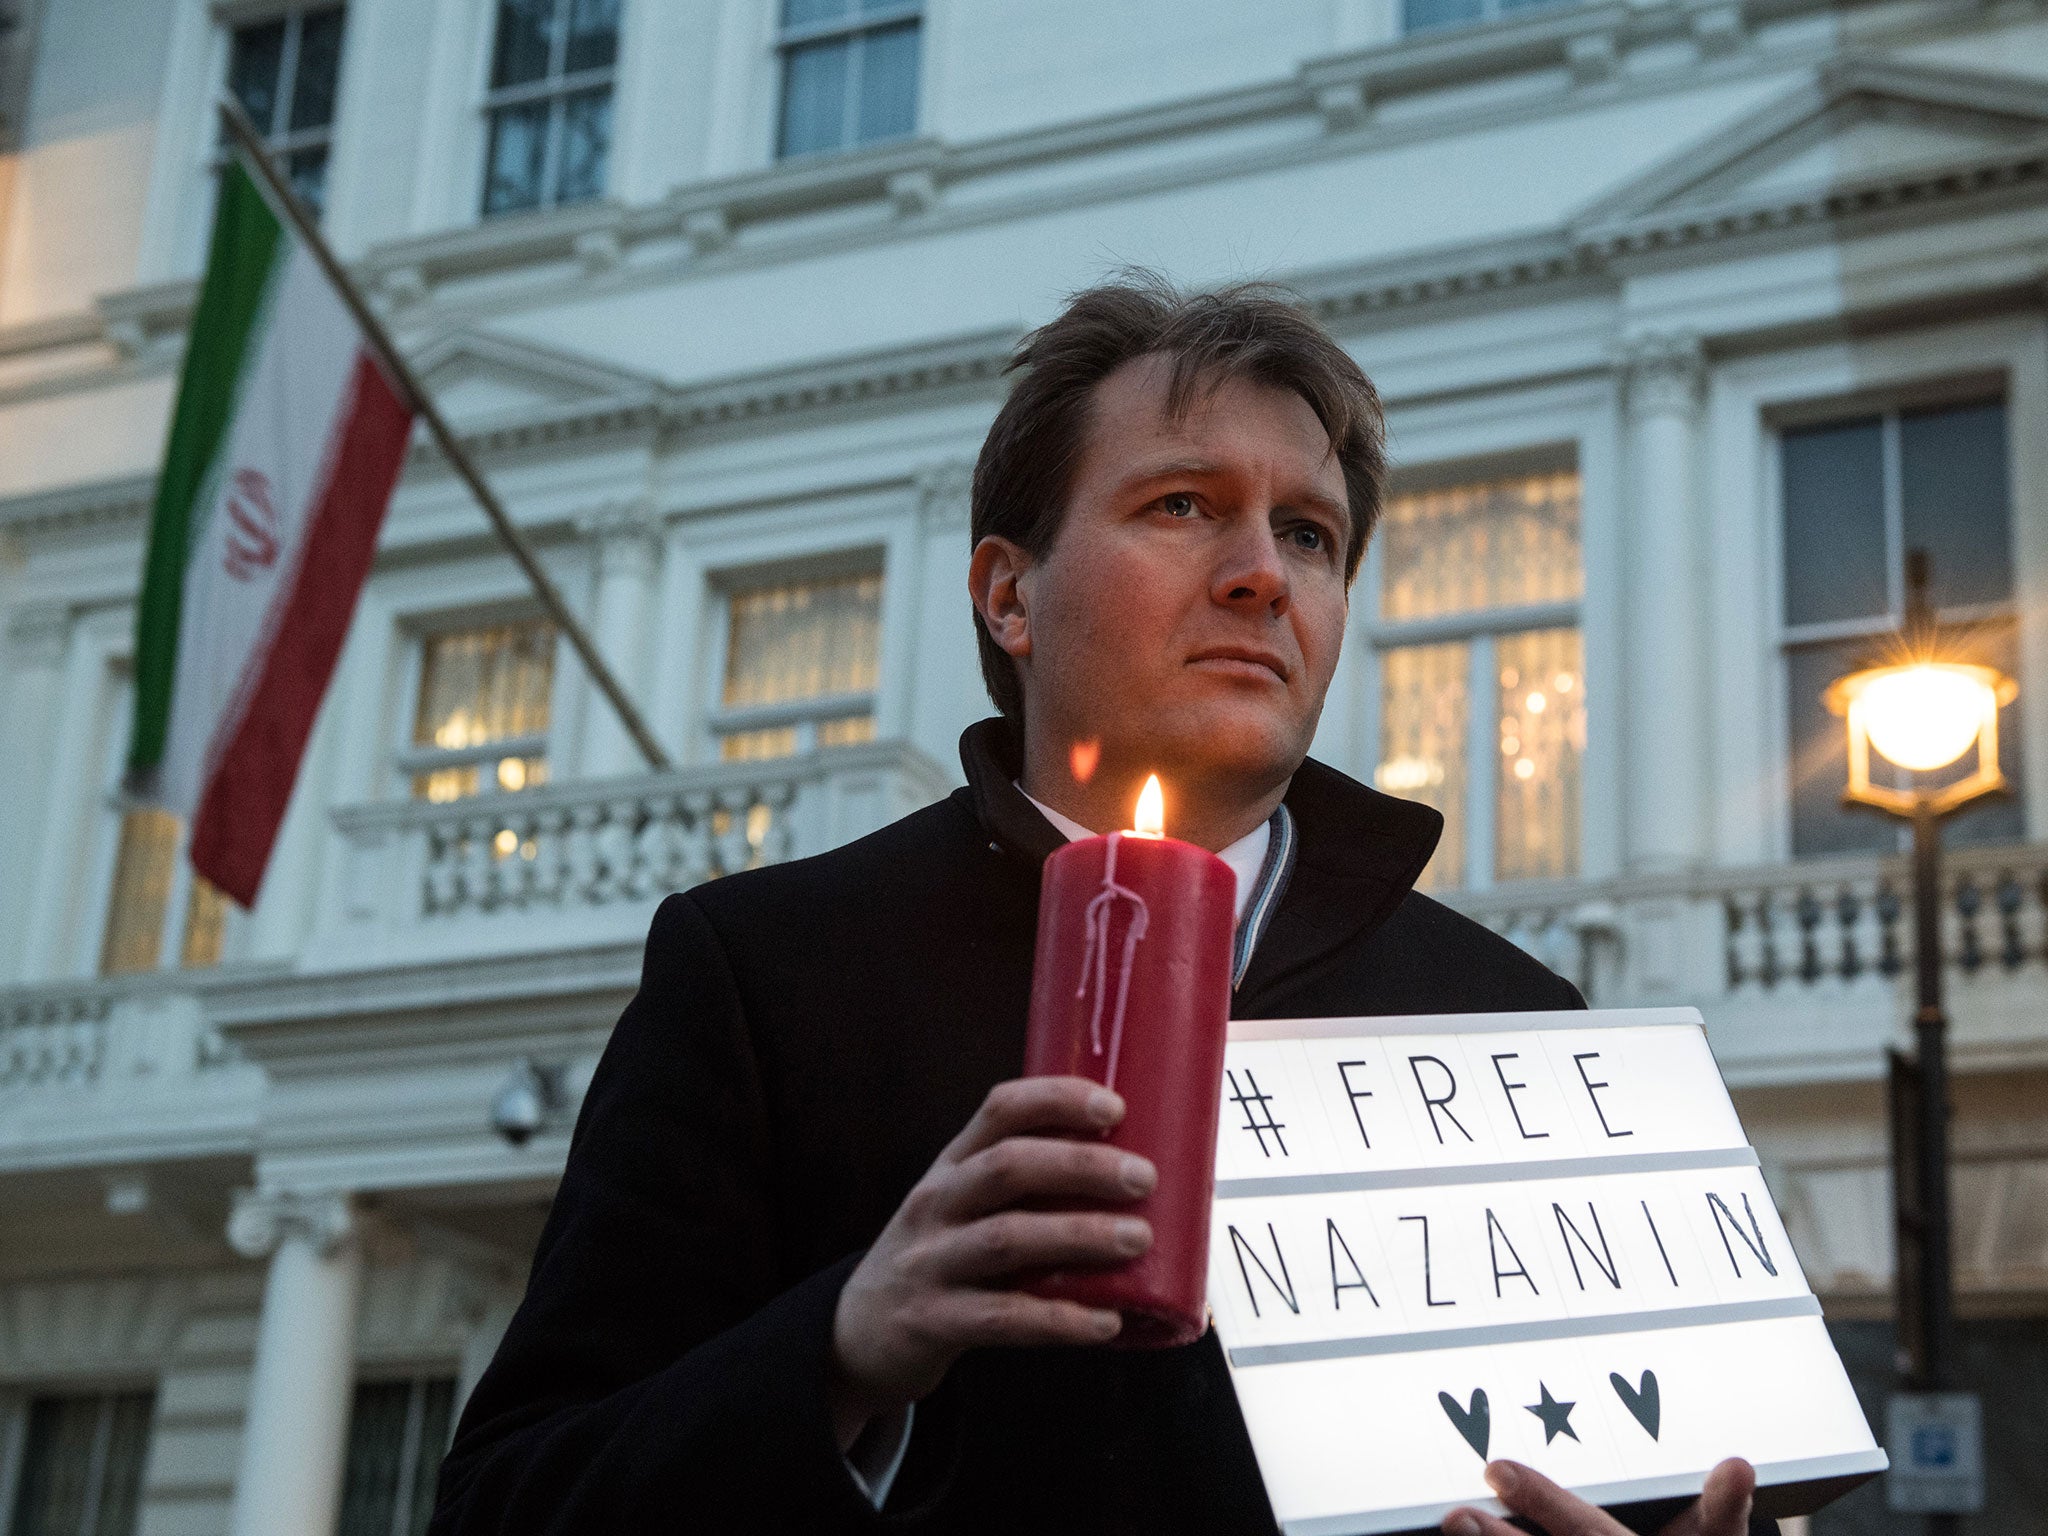 Richard Ratcliffe, husband of Nazanin Zaghari-Ratcliffe holds a '#Free Nazanin' sign and candle during a vigil for the British-Iranian mother